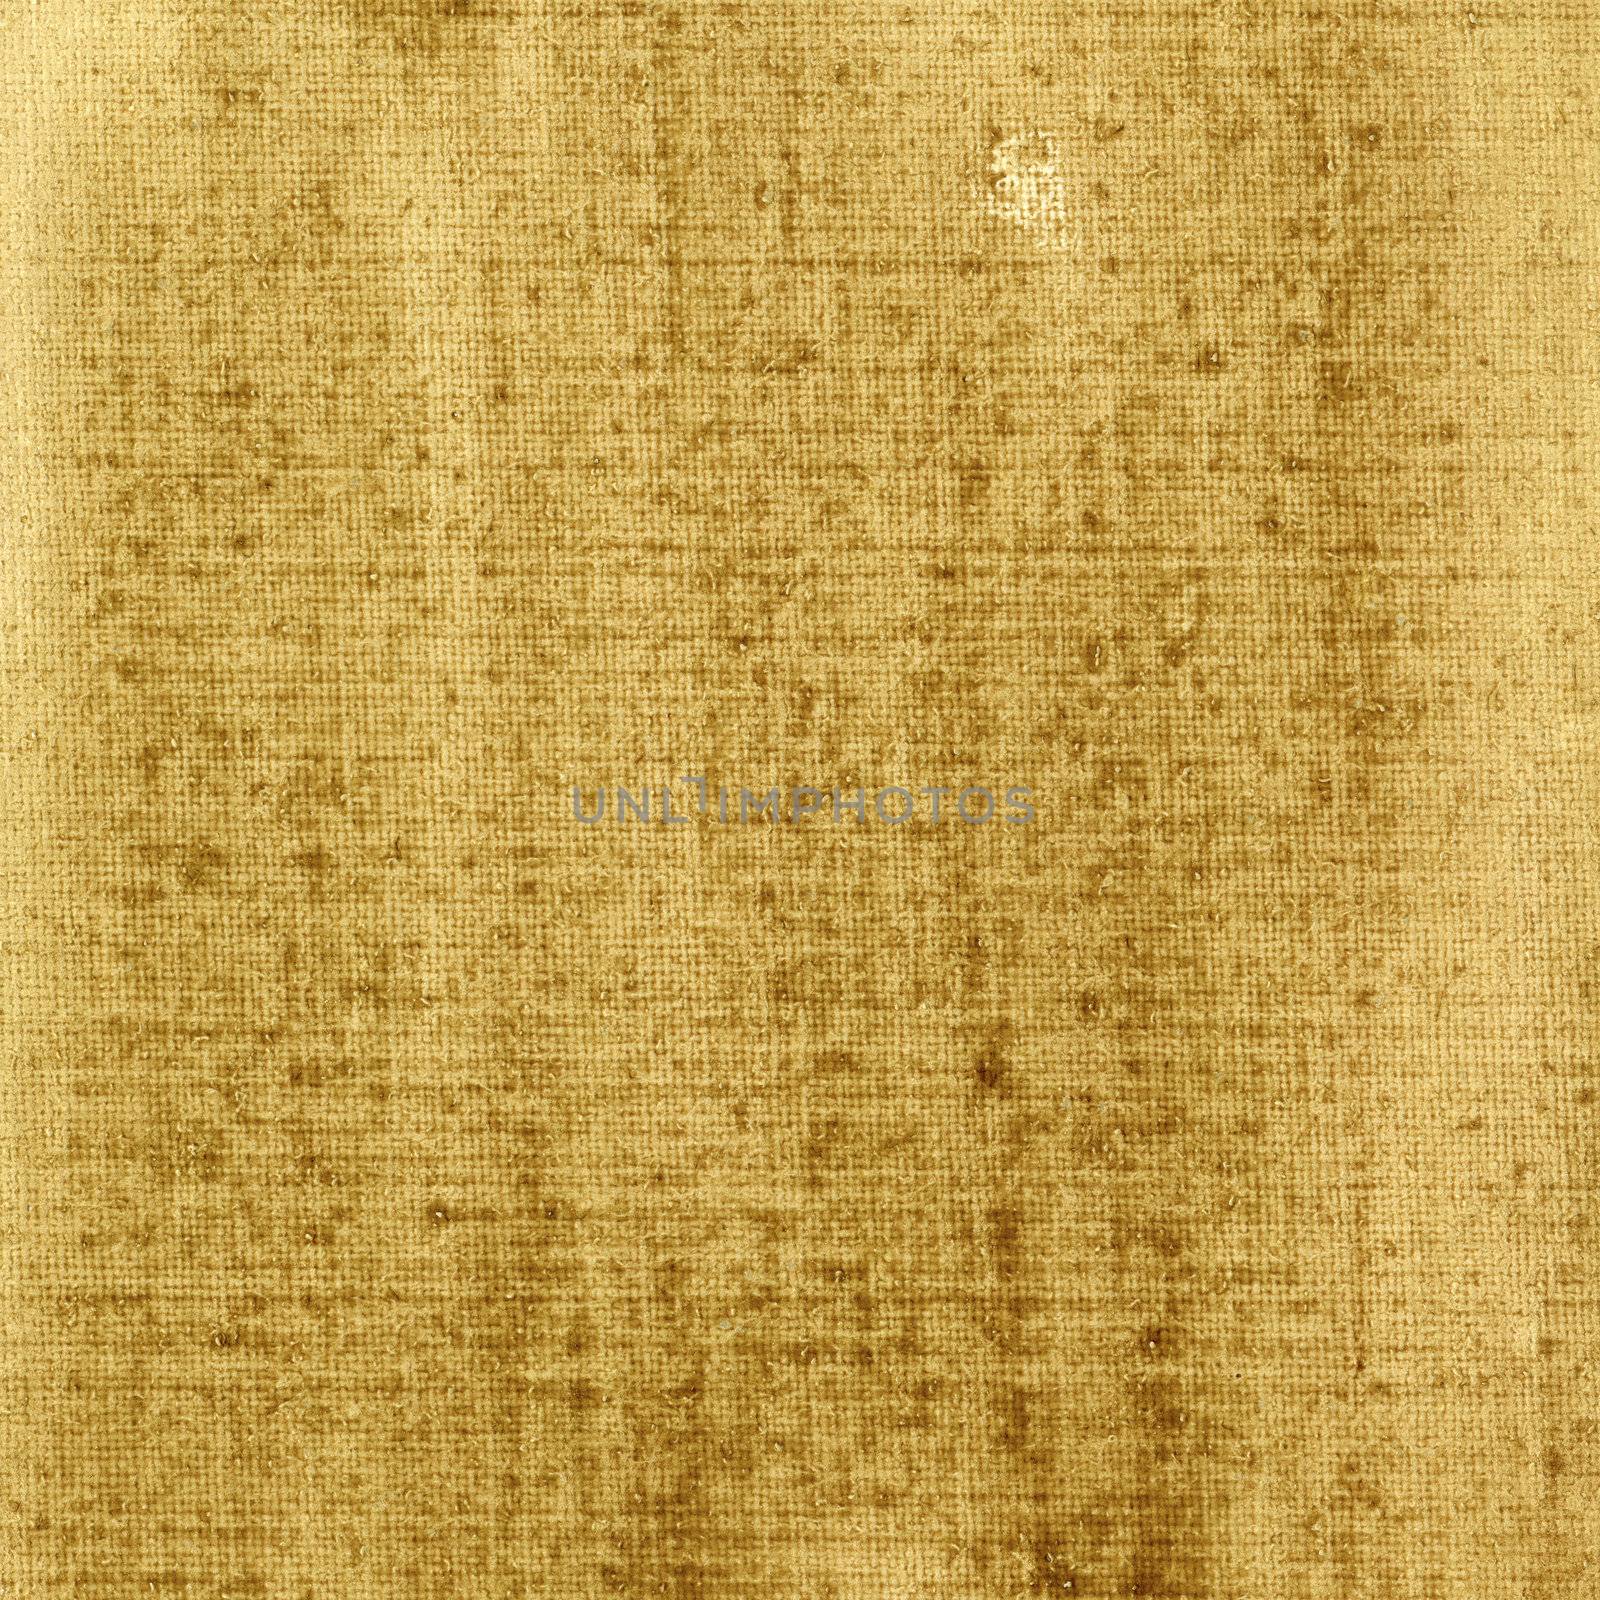 texture of nonuniform brown  watercolor abstract on cotton canvas, self made